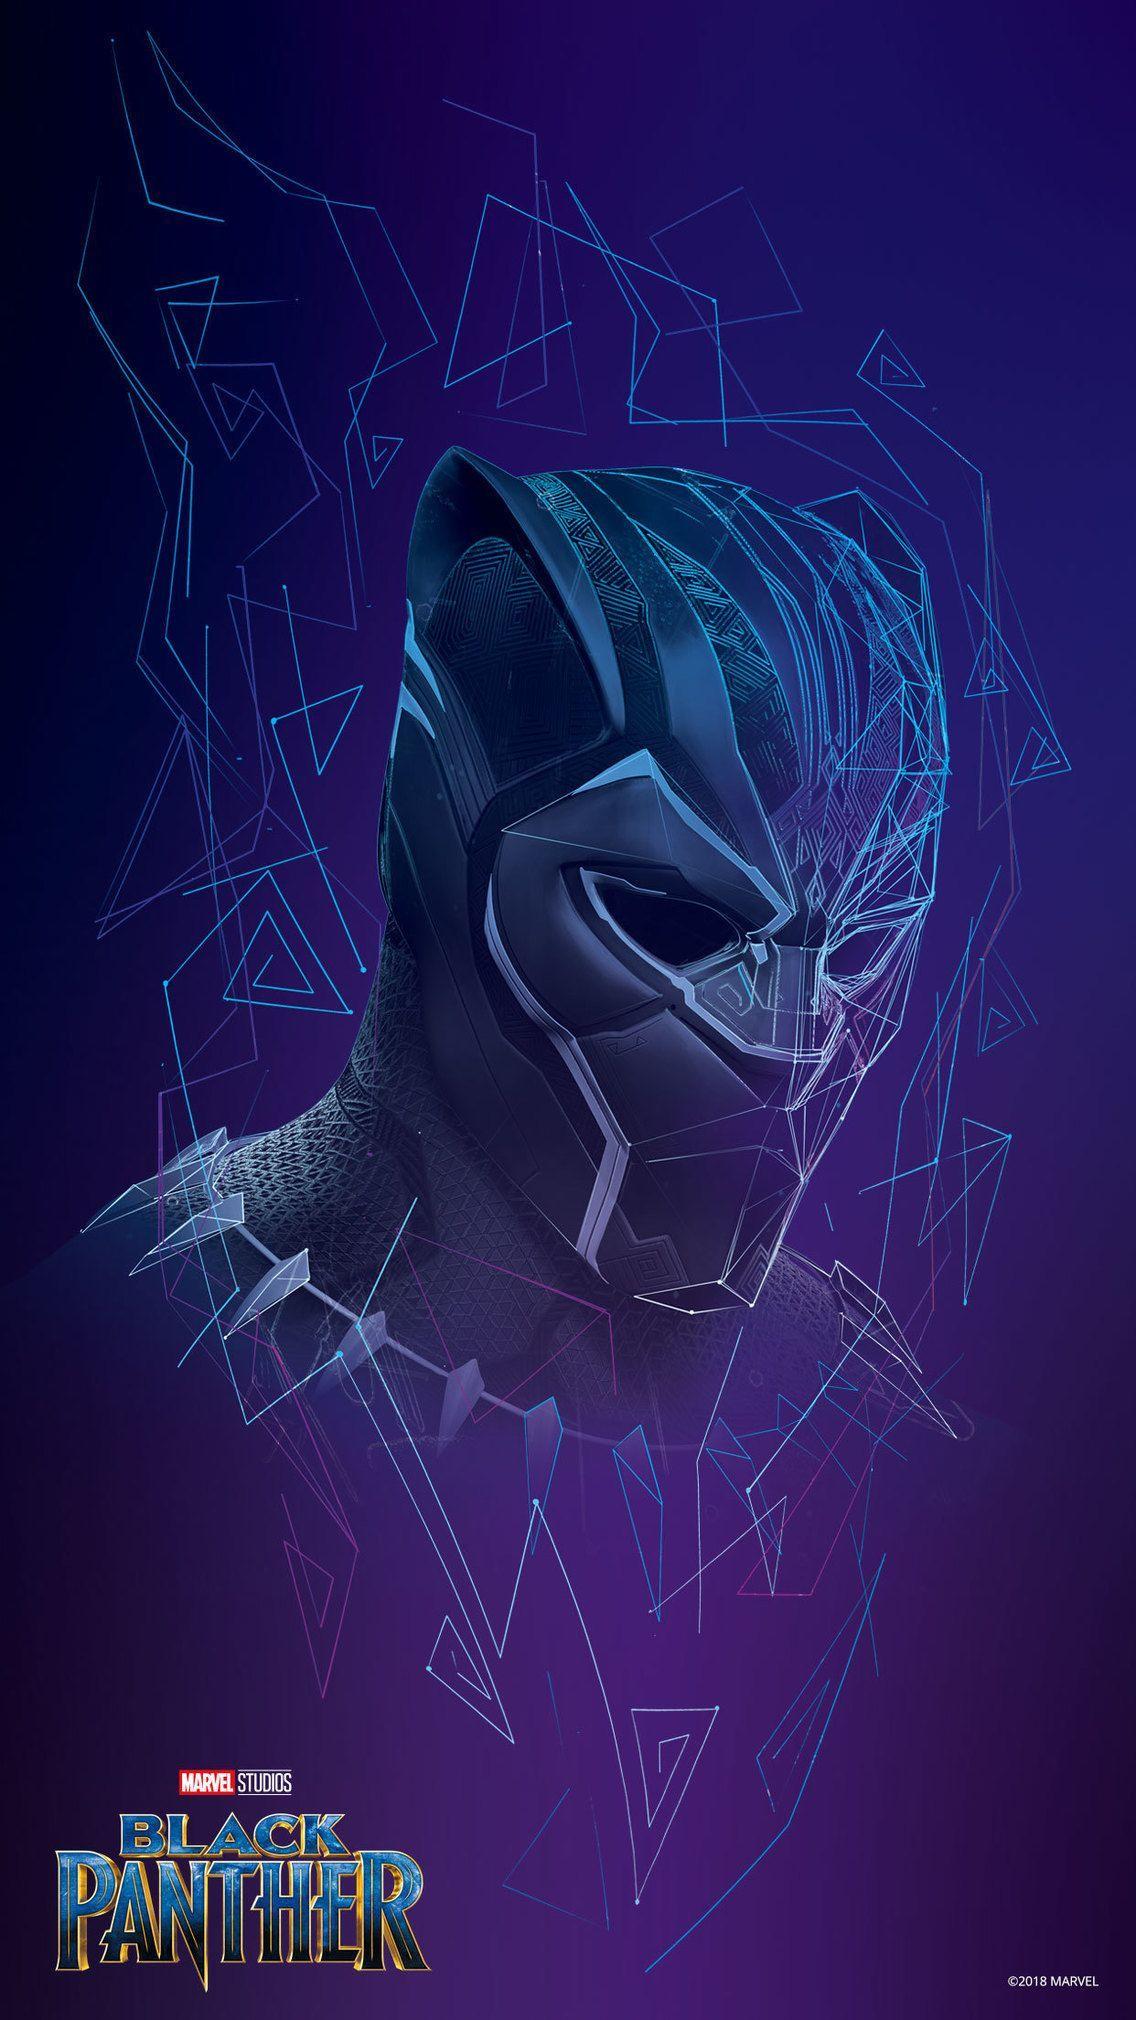 Black Panther Mobile Wallpaper. Disney Movies. Philippines